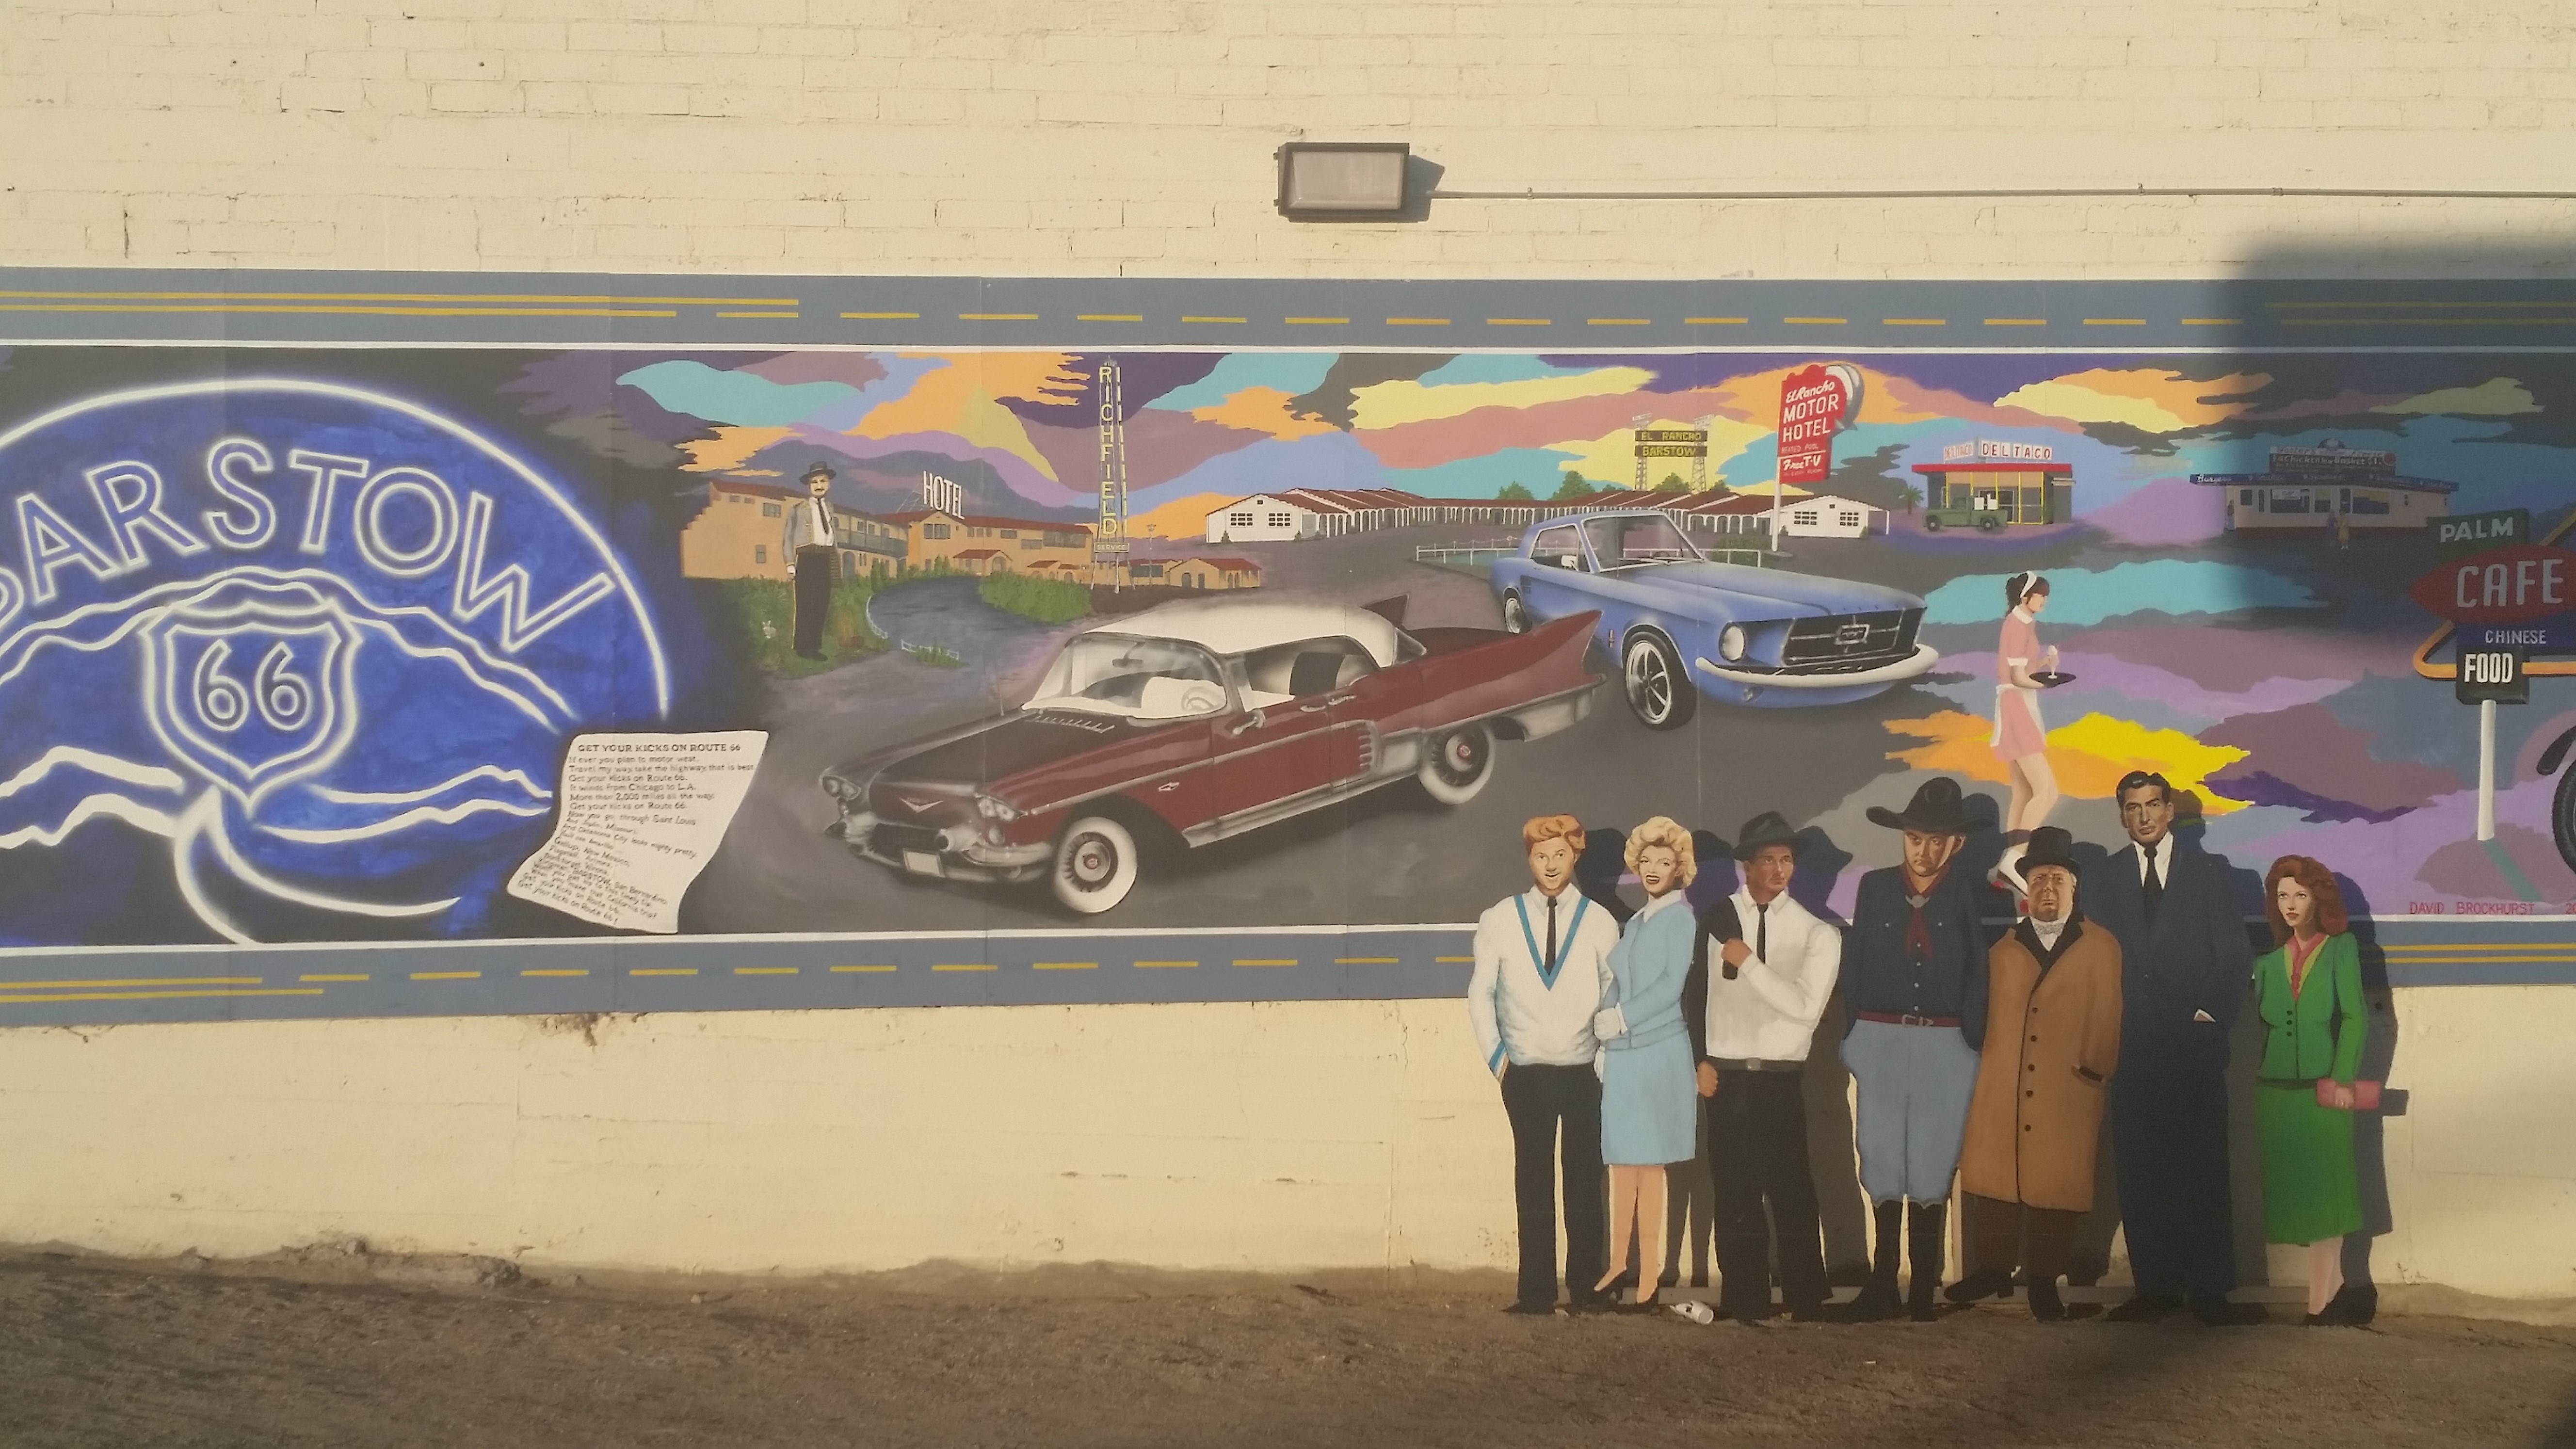 Barstow Mural